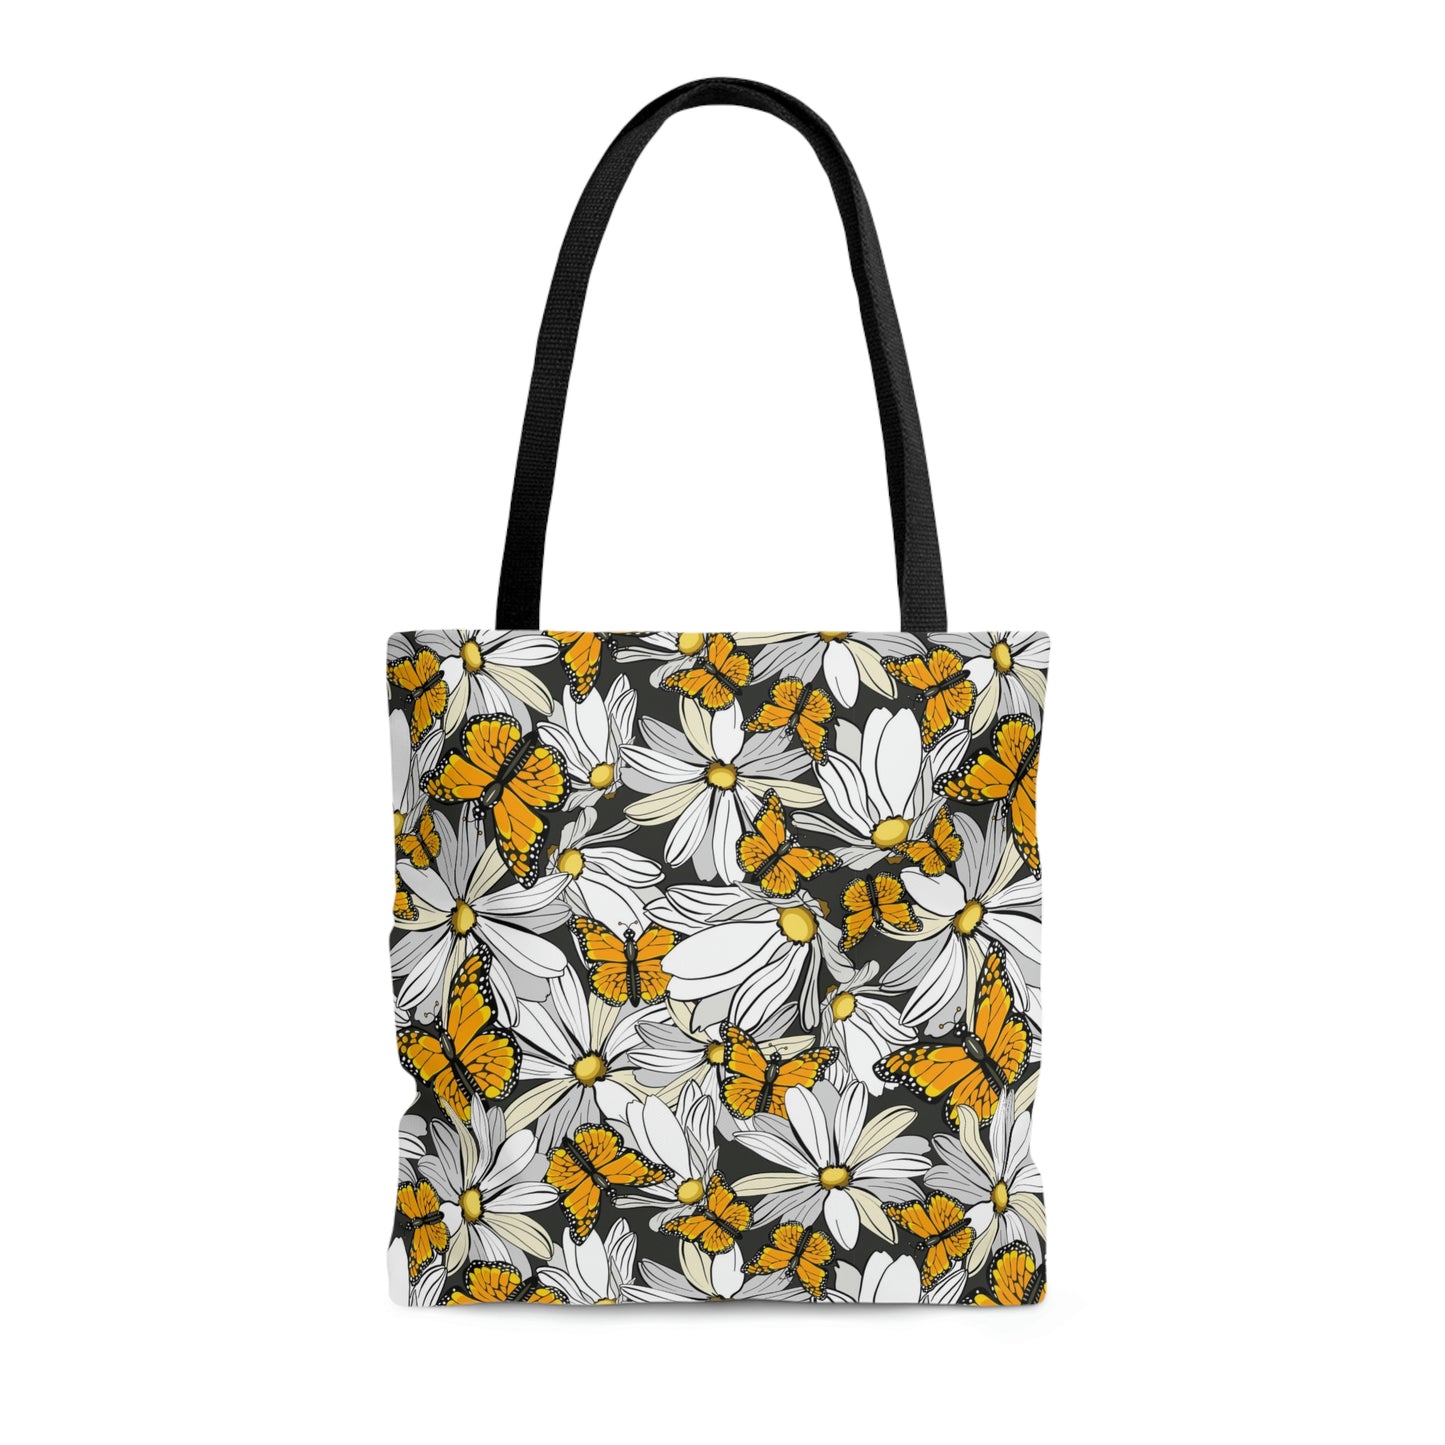 Monarch butterfly Tote Bag. White flowes and butterflies bag. Plant milkweed and save the monarch butterflies.